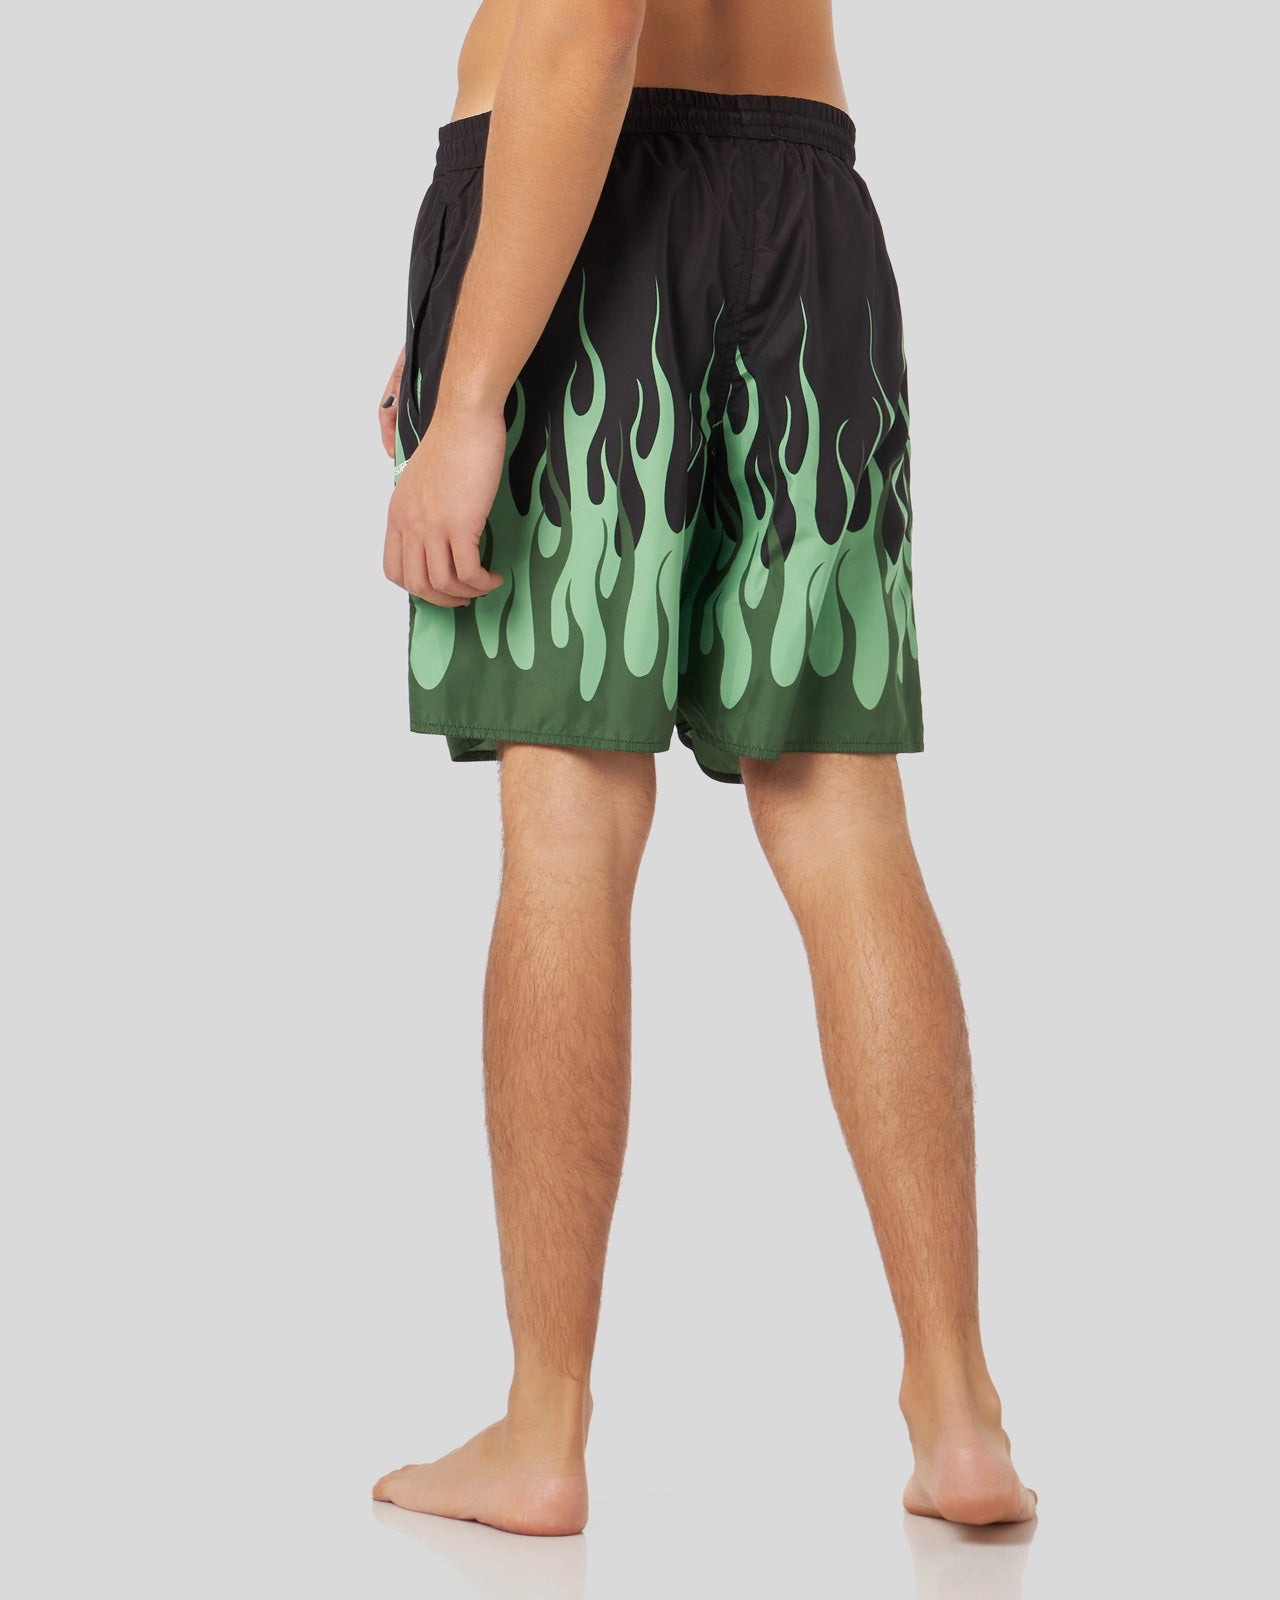 BLACK SWIMWEAR WITH DOUBLE GREEN FLAMES